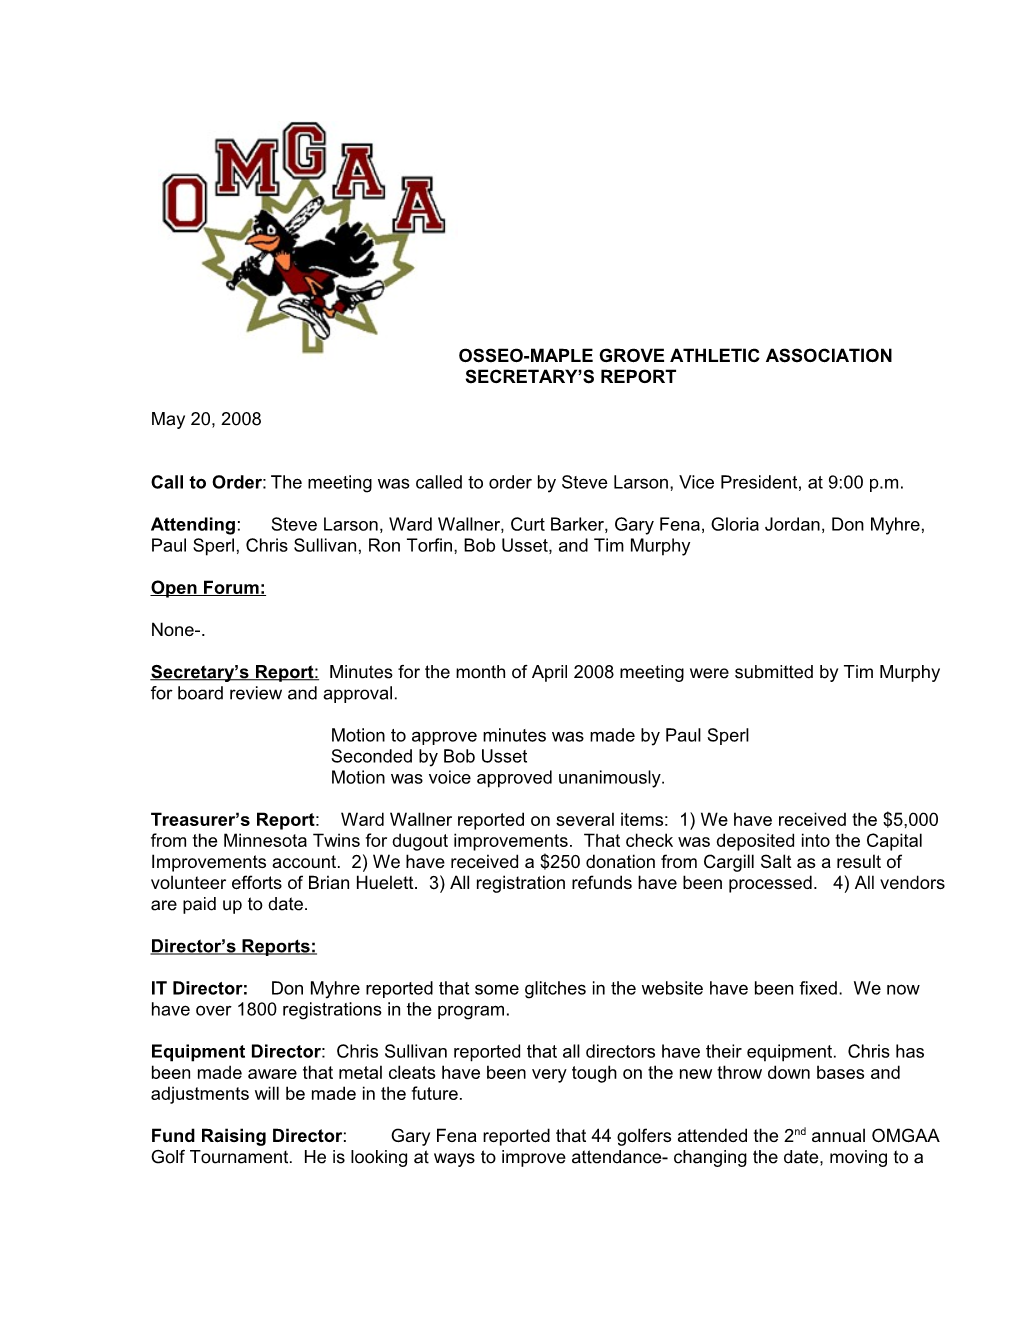 Osseo-Maple Grove Athletic Association s4